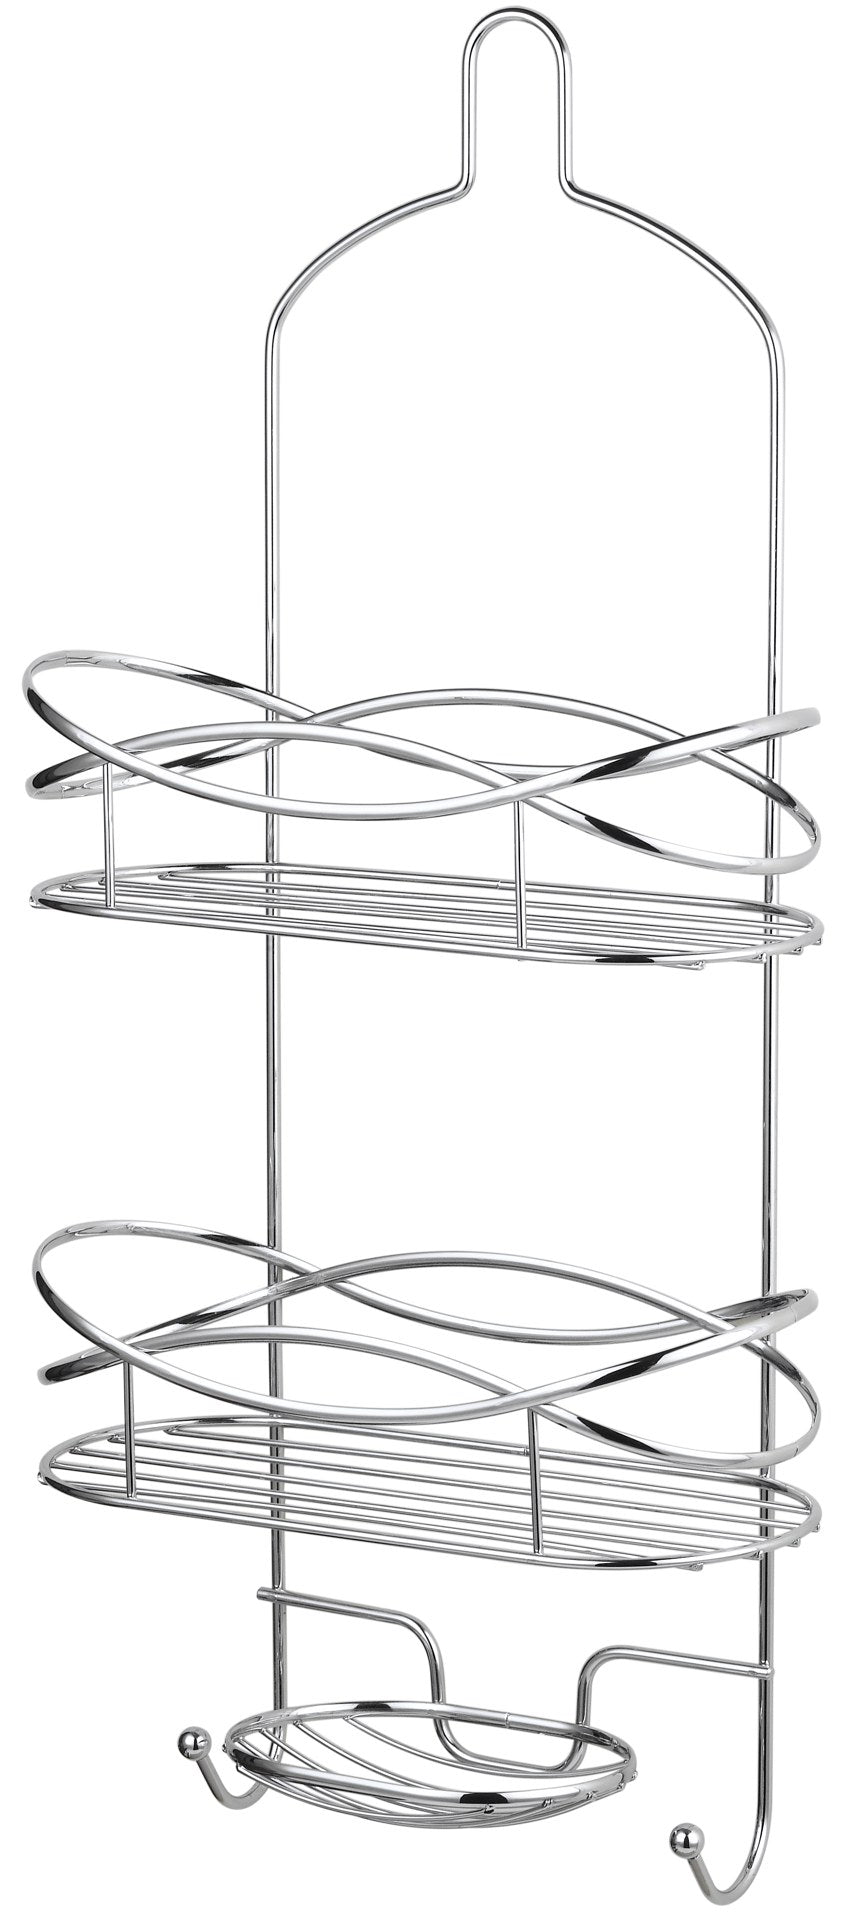 ITY Chrome Shower Caddy - L0891